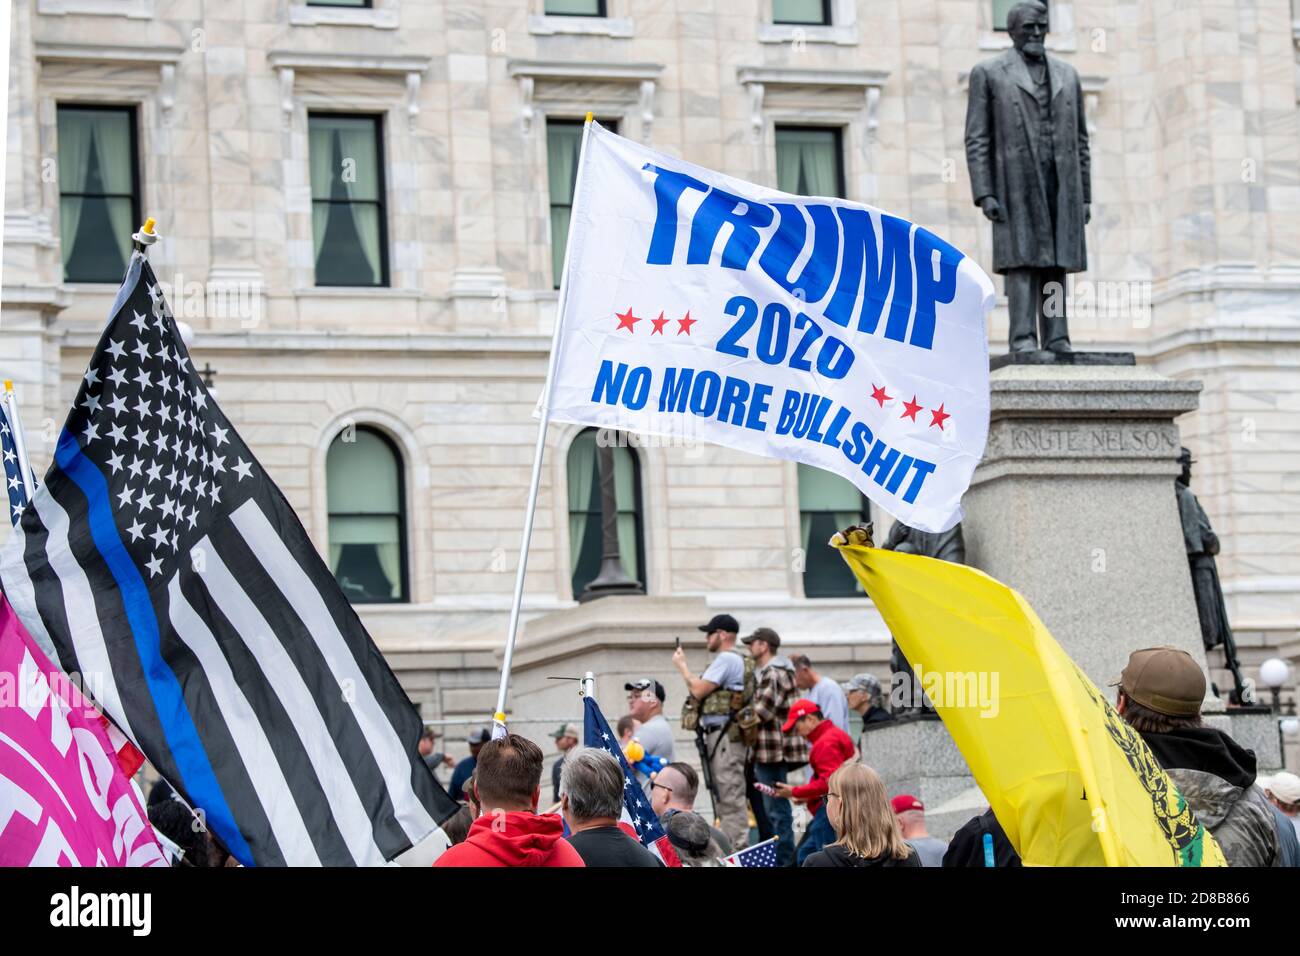 St. Paul, Minnesota. United We Stand & Patriots March. Protesters rally in support of Trump and against statewide pandemic policies they say are infri Stock Photo